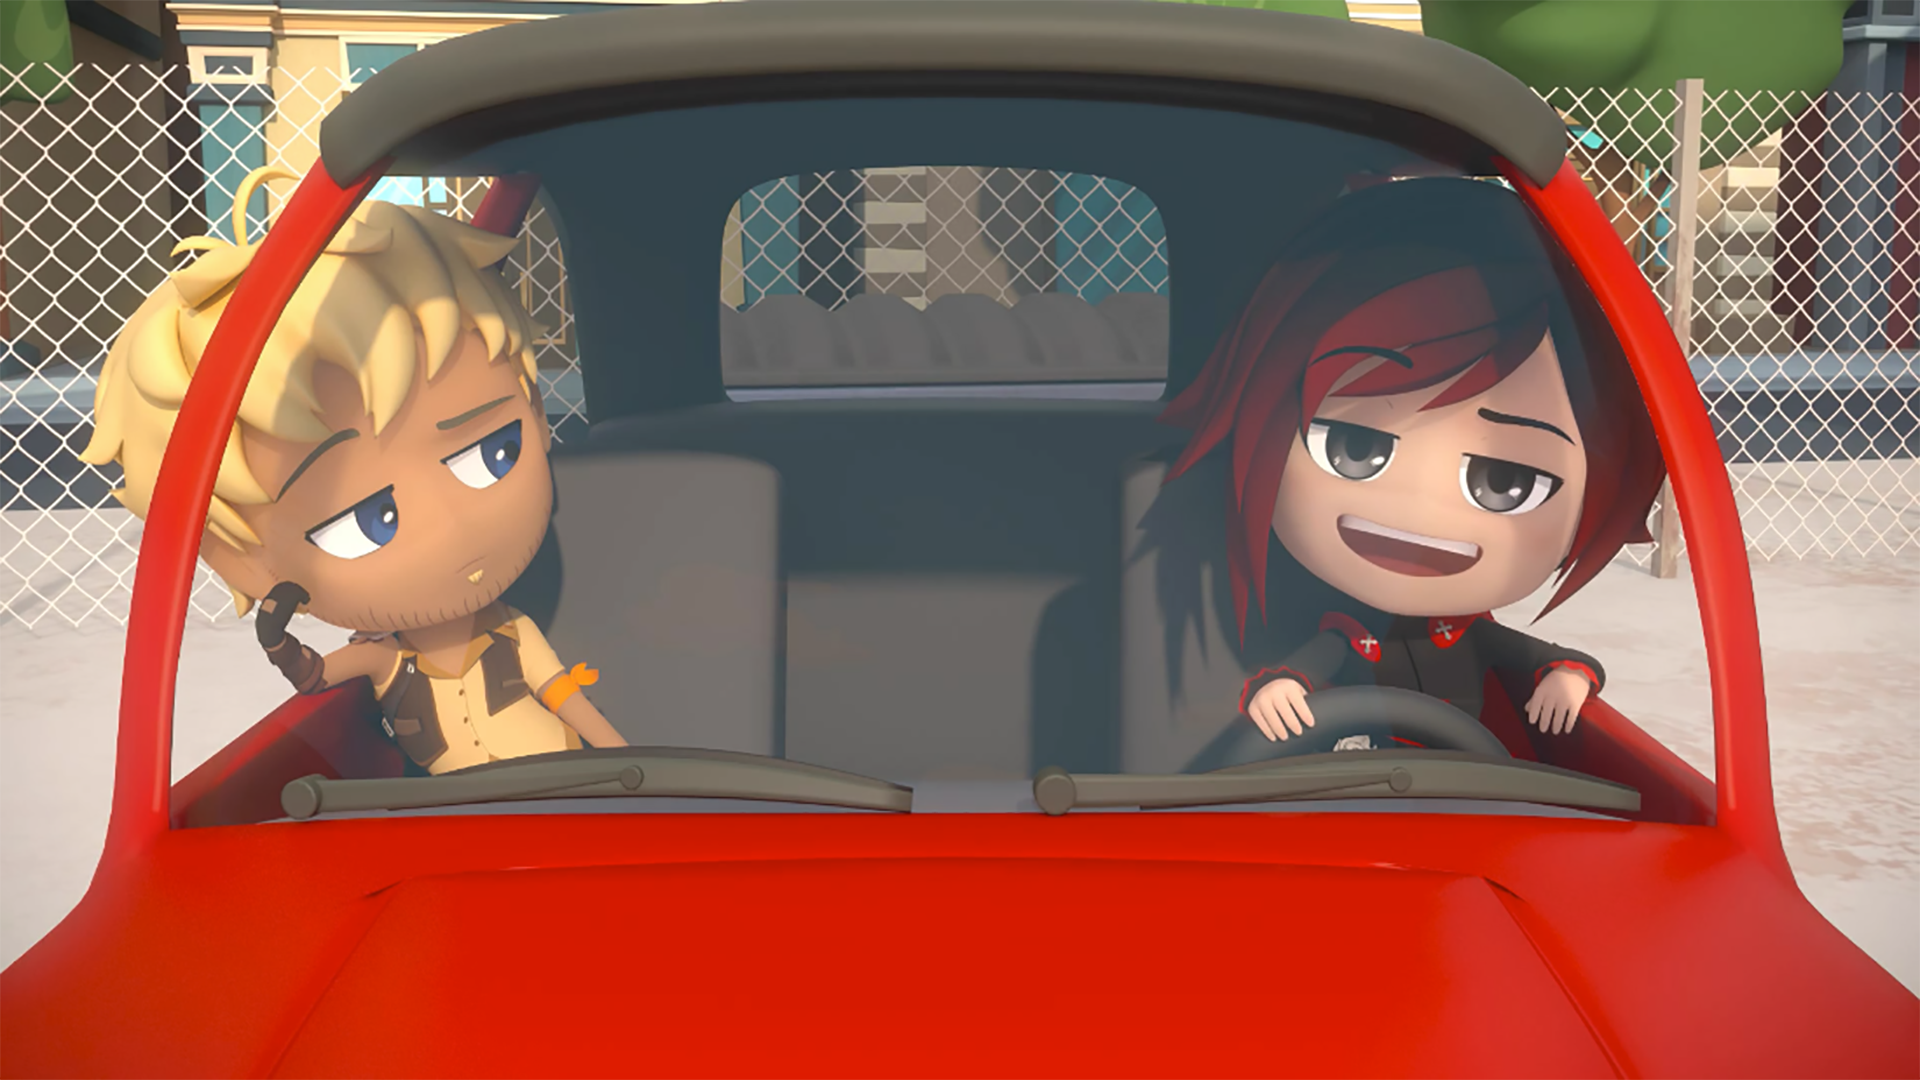 In The Clutches of Evil | RWBY Wiki | Fandom